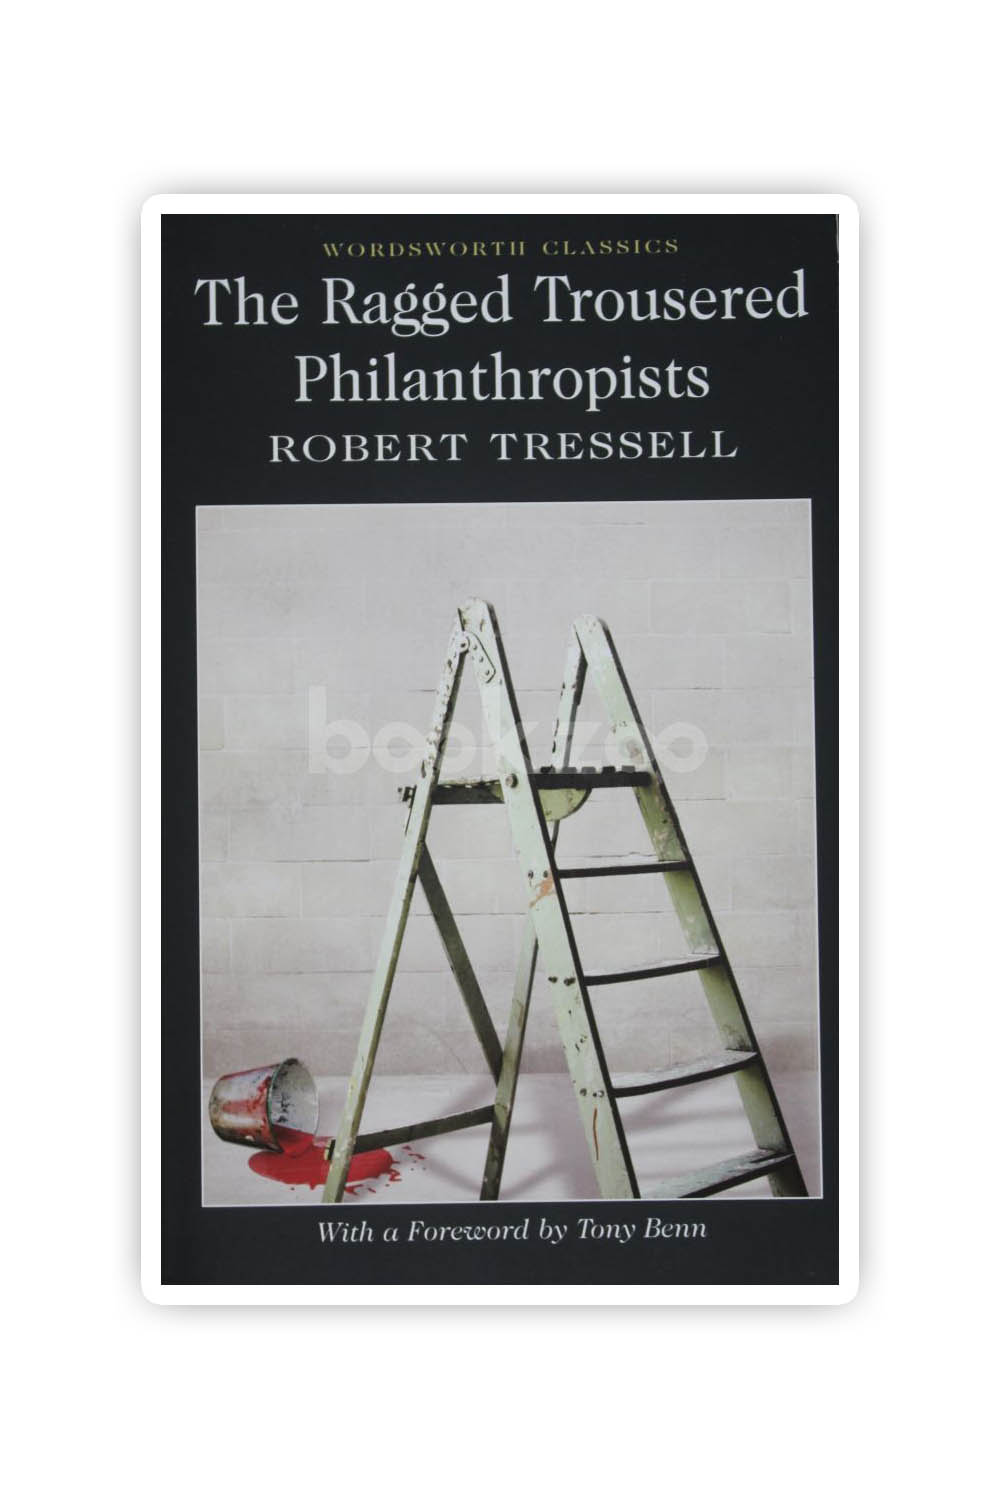 The ragged trousered philanthropists by Robert Tressell  Open Library